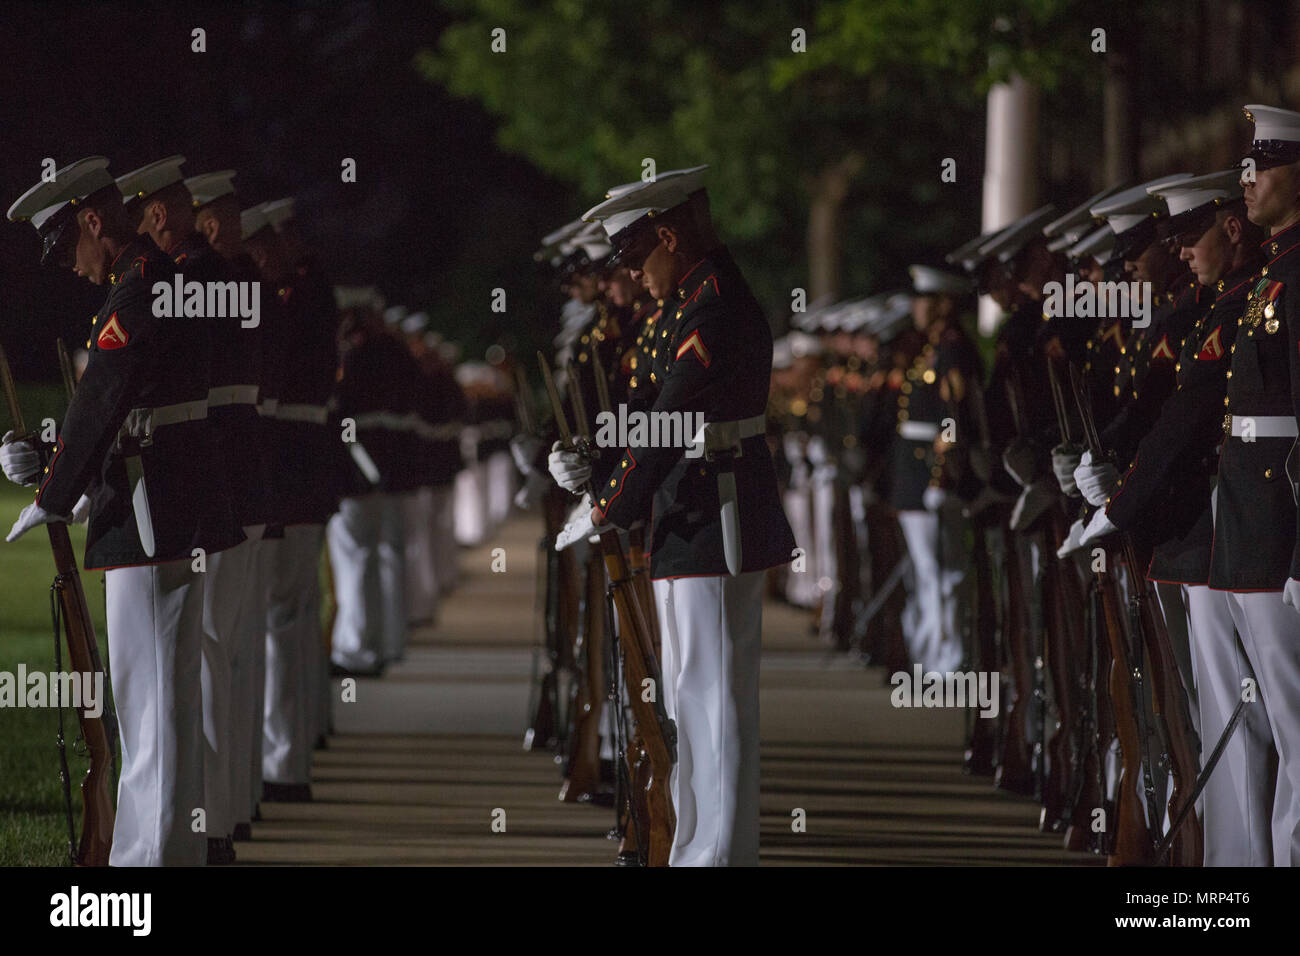 U.S. Marines with Marine Barracks Washington perform during an evening parade, Marine Barracks Washington, Washington, D.C., June 23, 2017. Evening parades are held as a means of honoring senior officials, distinguished citizens and supporters of the Marine Corps. (U.S. Marine Corps photo by Lance Cpl. Stephon L. McRae) Stock Photo